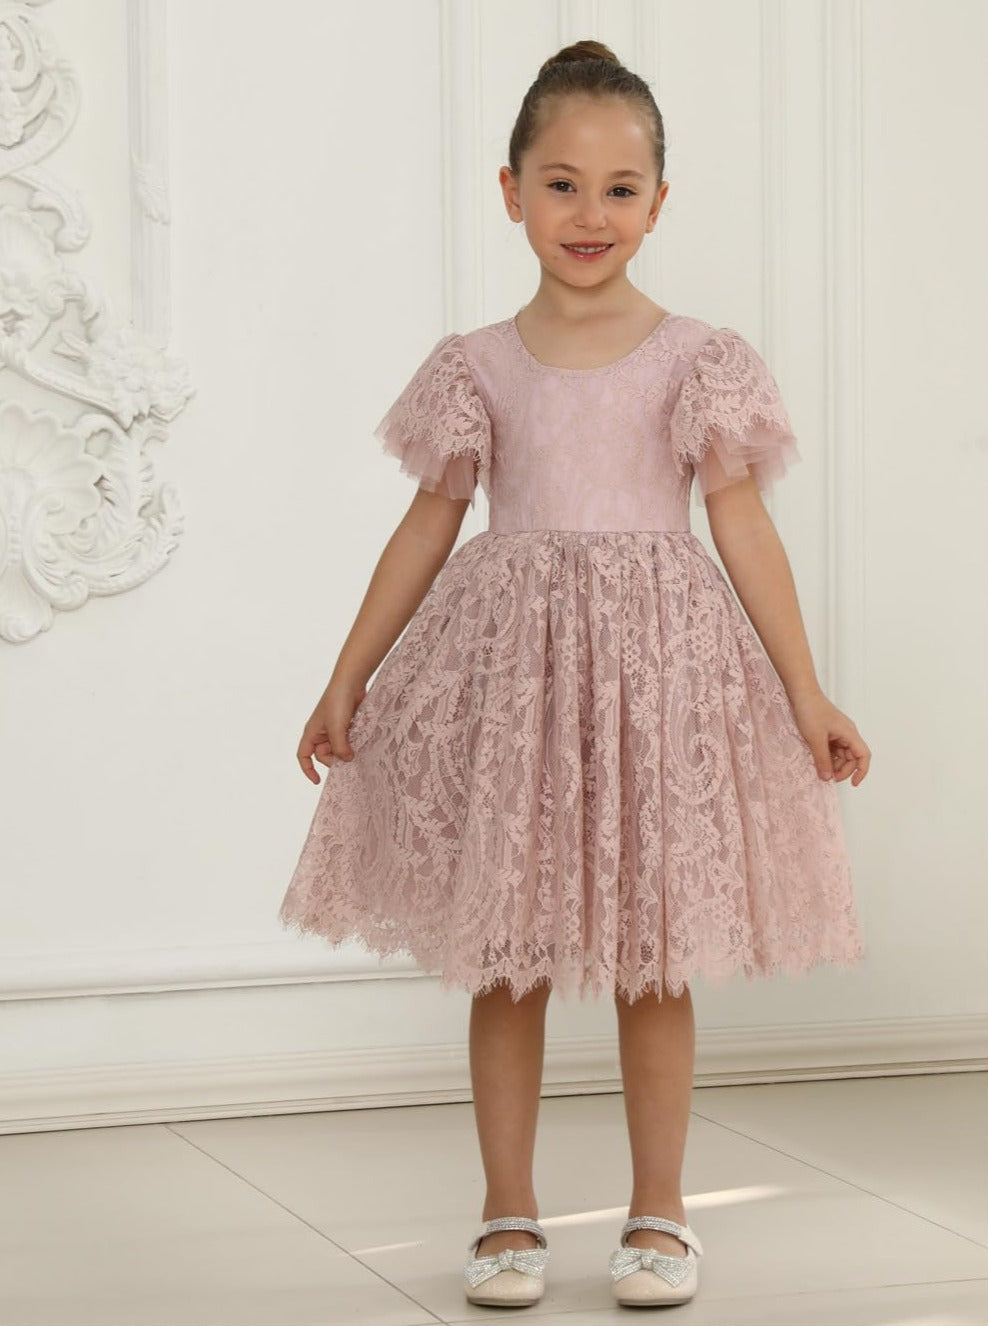 Paisley All Lace Flower Girl Dress in Dusty Pink